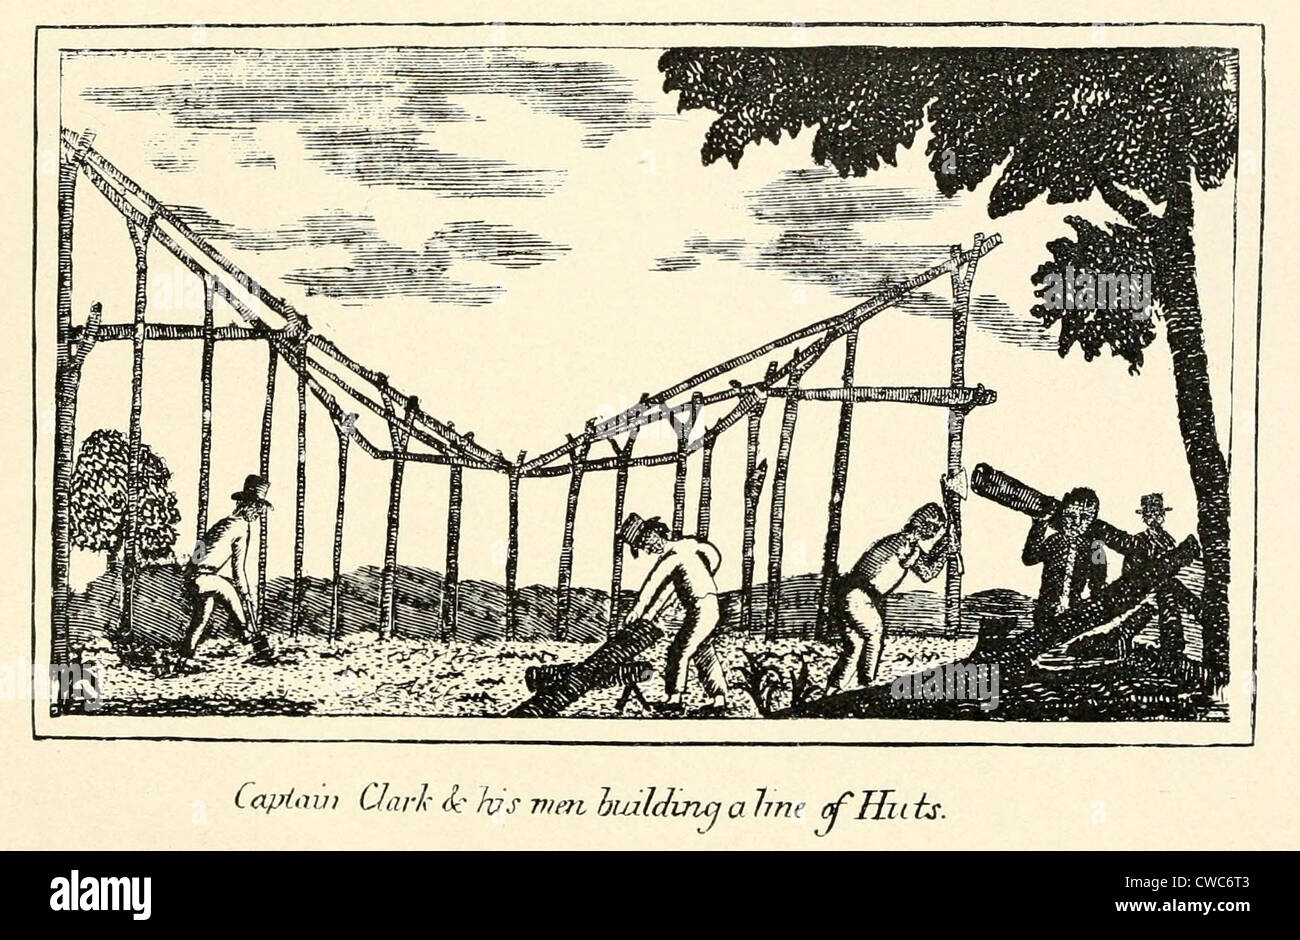 Illustration from Lewis and Clark's journal of the Corps of Discovery from 1803-6. 'Captain Clark and his men building line of Stock Photo